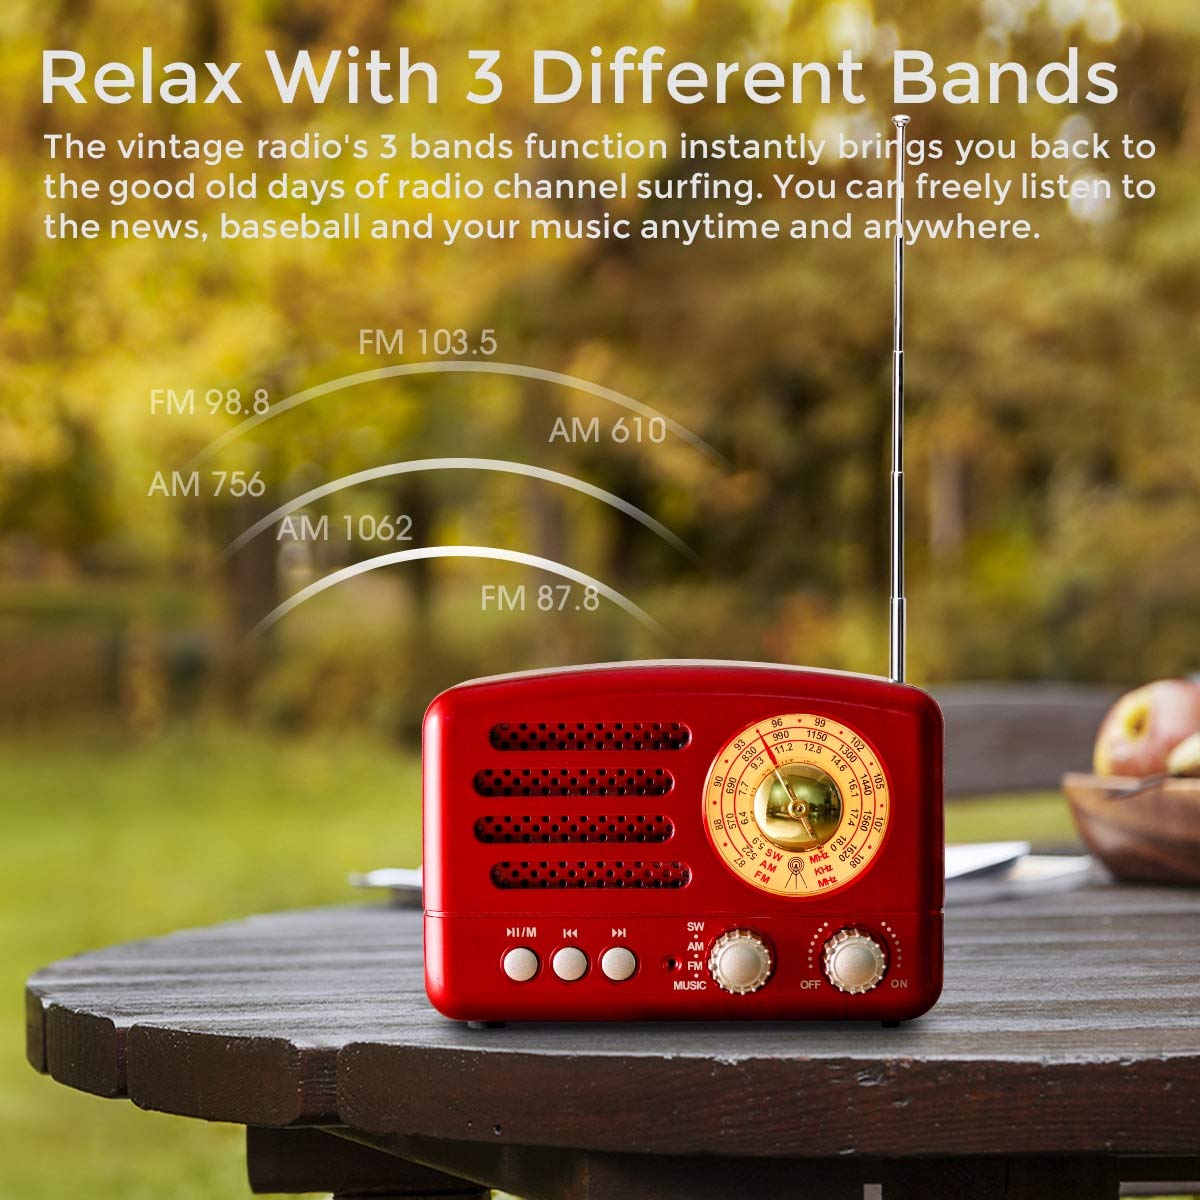 PRUNUS J-160 Portable Radio Retro, SW AM FM Radio Small with Bluetooth Speaker, Transistor radio Battery Operated,upgrade 1800mAh Rechargeable Battery,Supports TF Card/AUX/USB MP3 Player (Red)